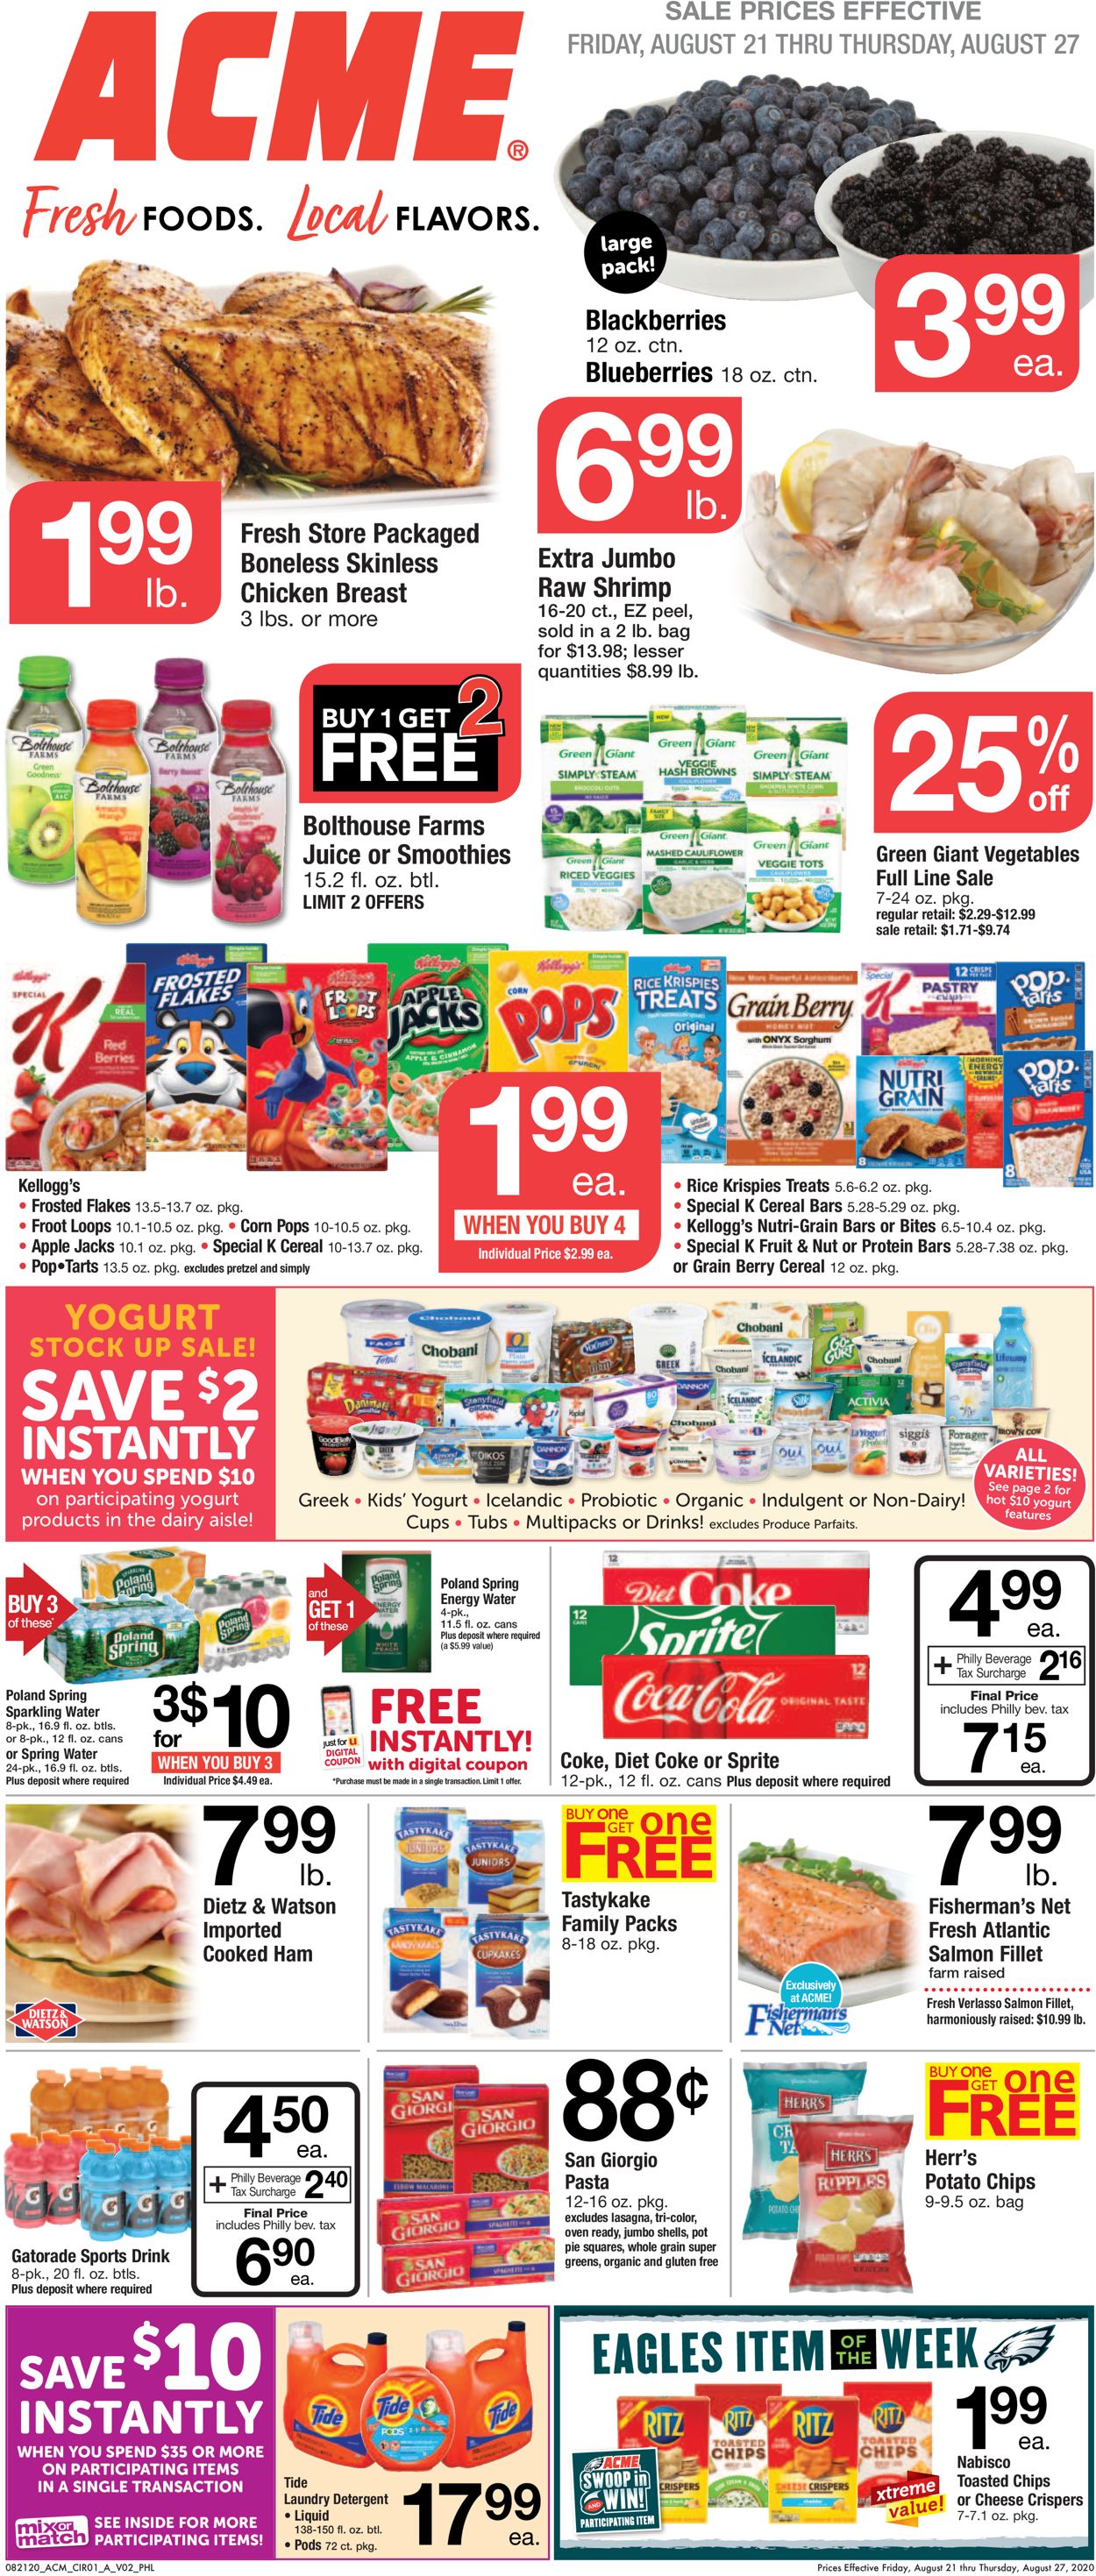 Acme Current weekly ad 08/21 - 08/27/2020 - frequent-ads.com